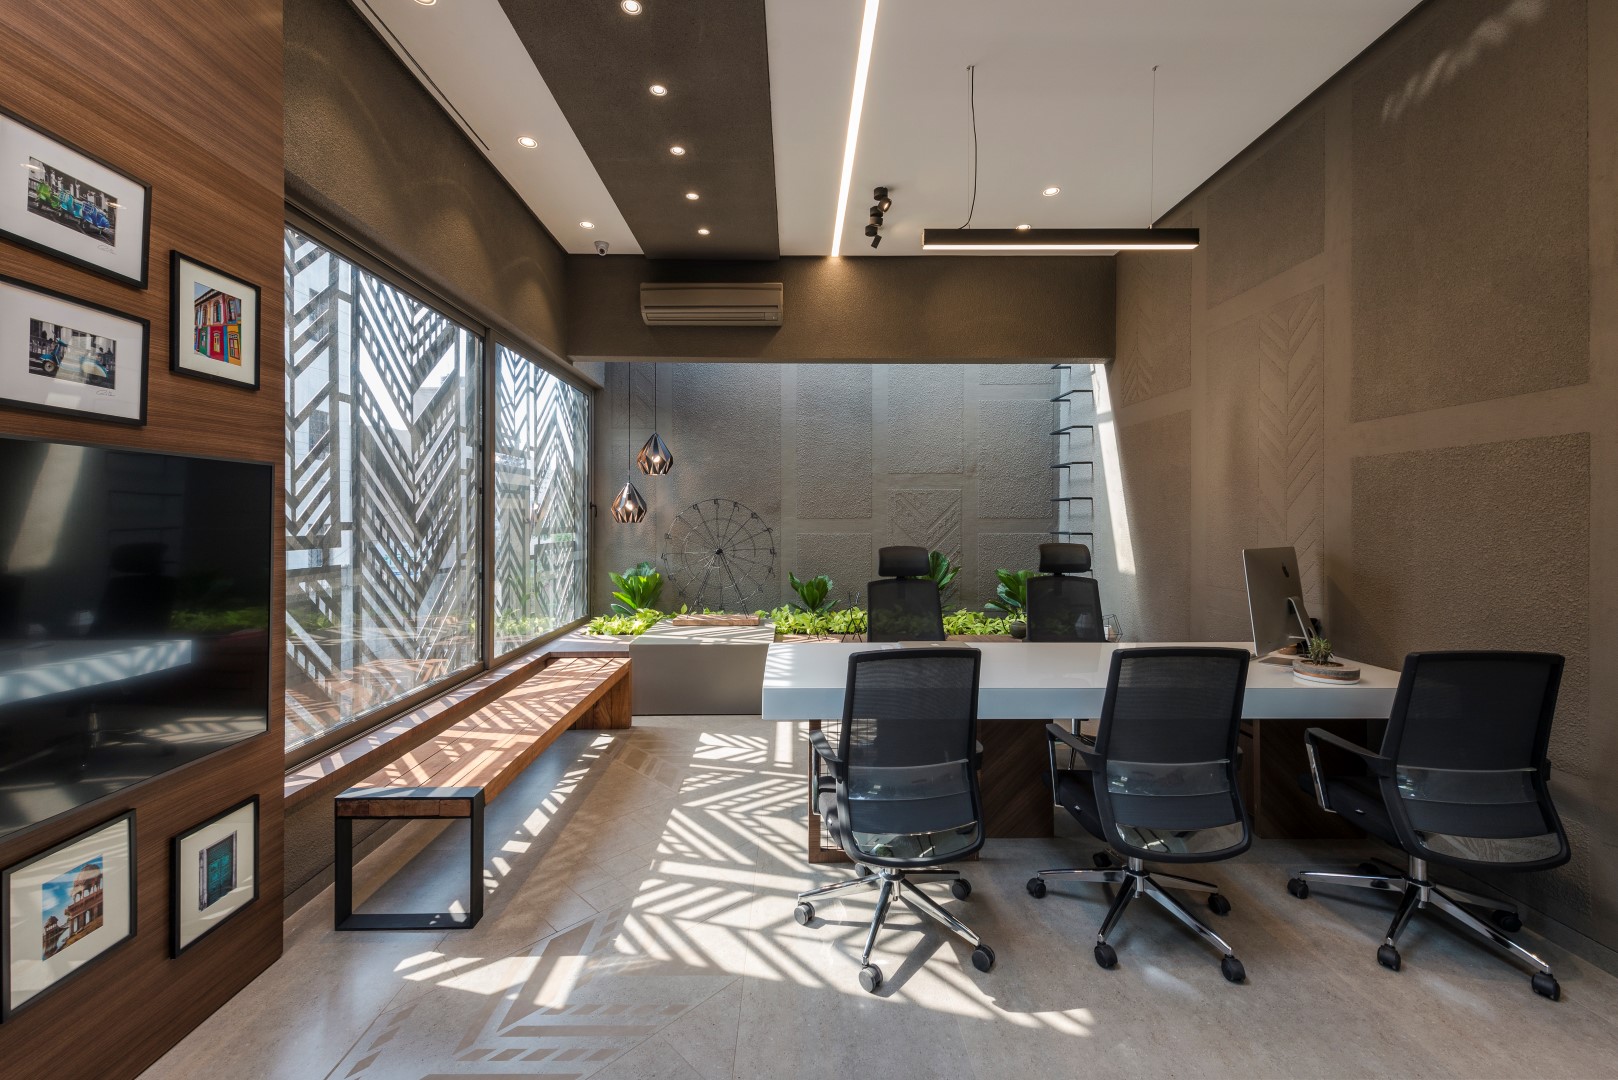 The Architects' Own Office - All About portico Office Building » portico  design concepts